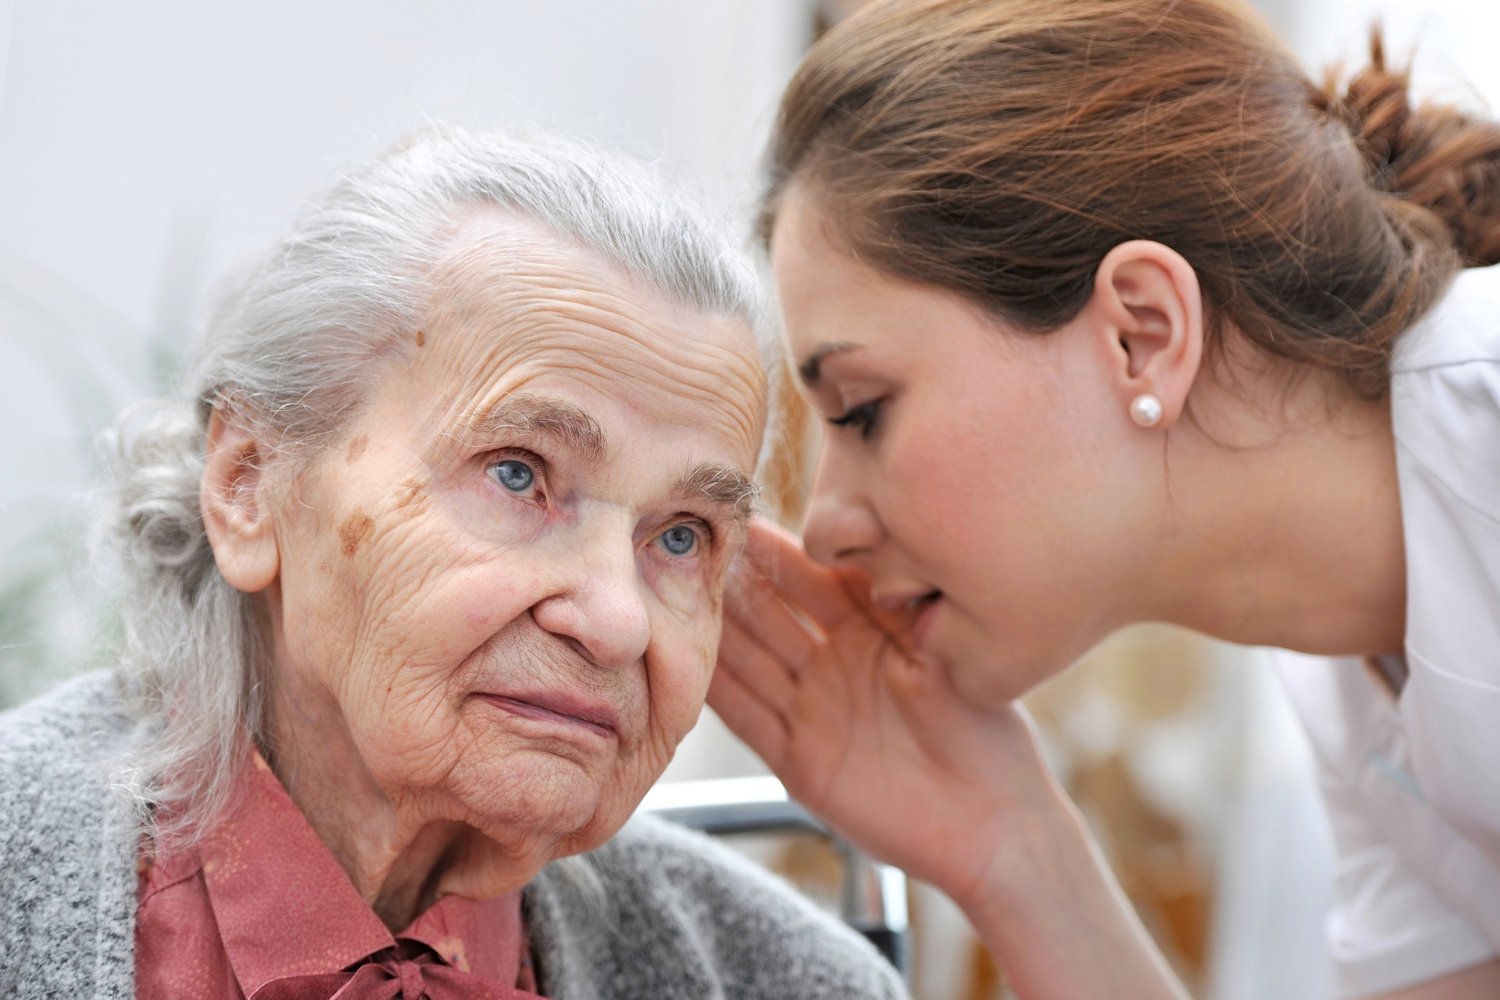 A staff member speaking with a senior resident